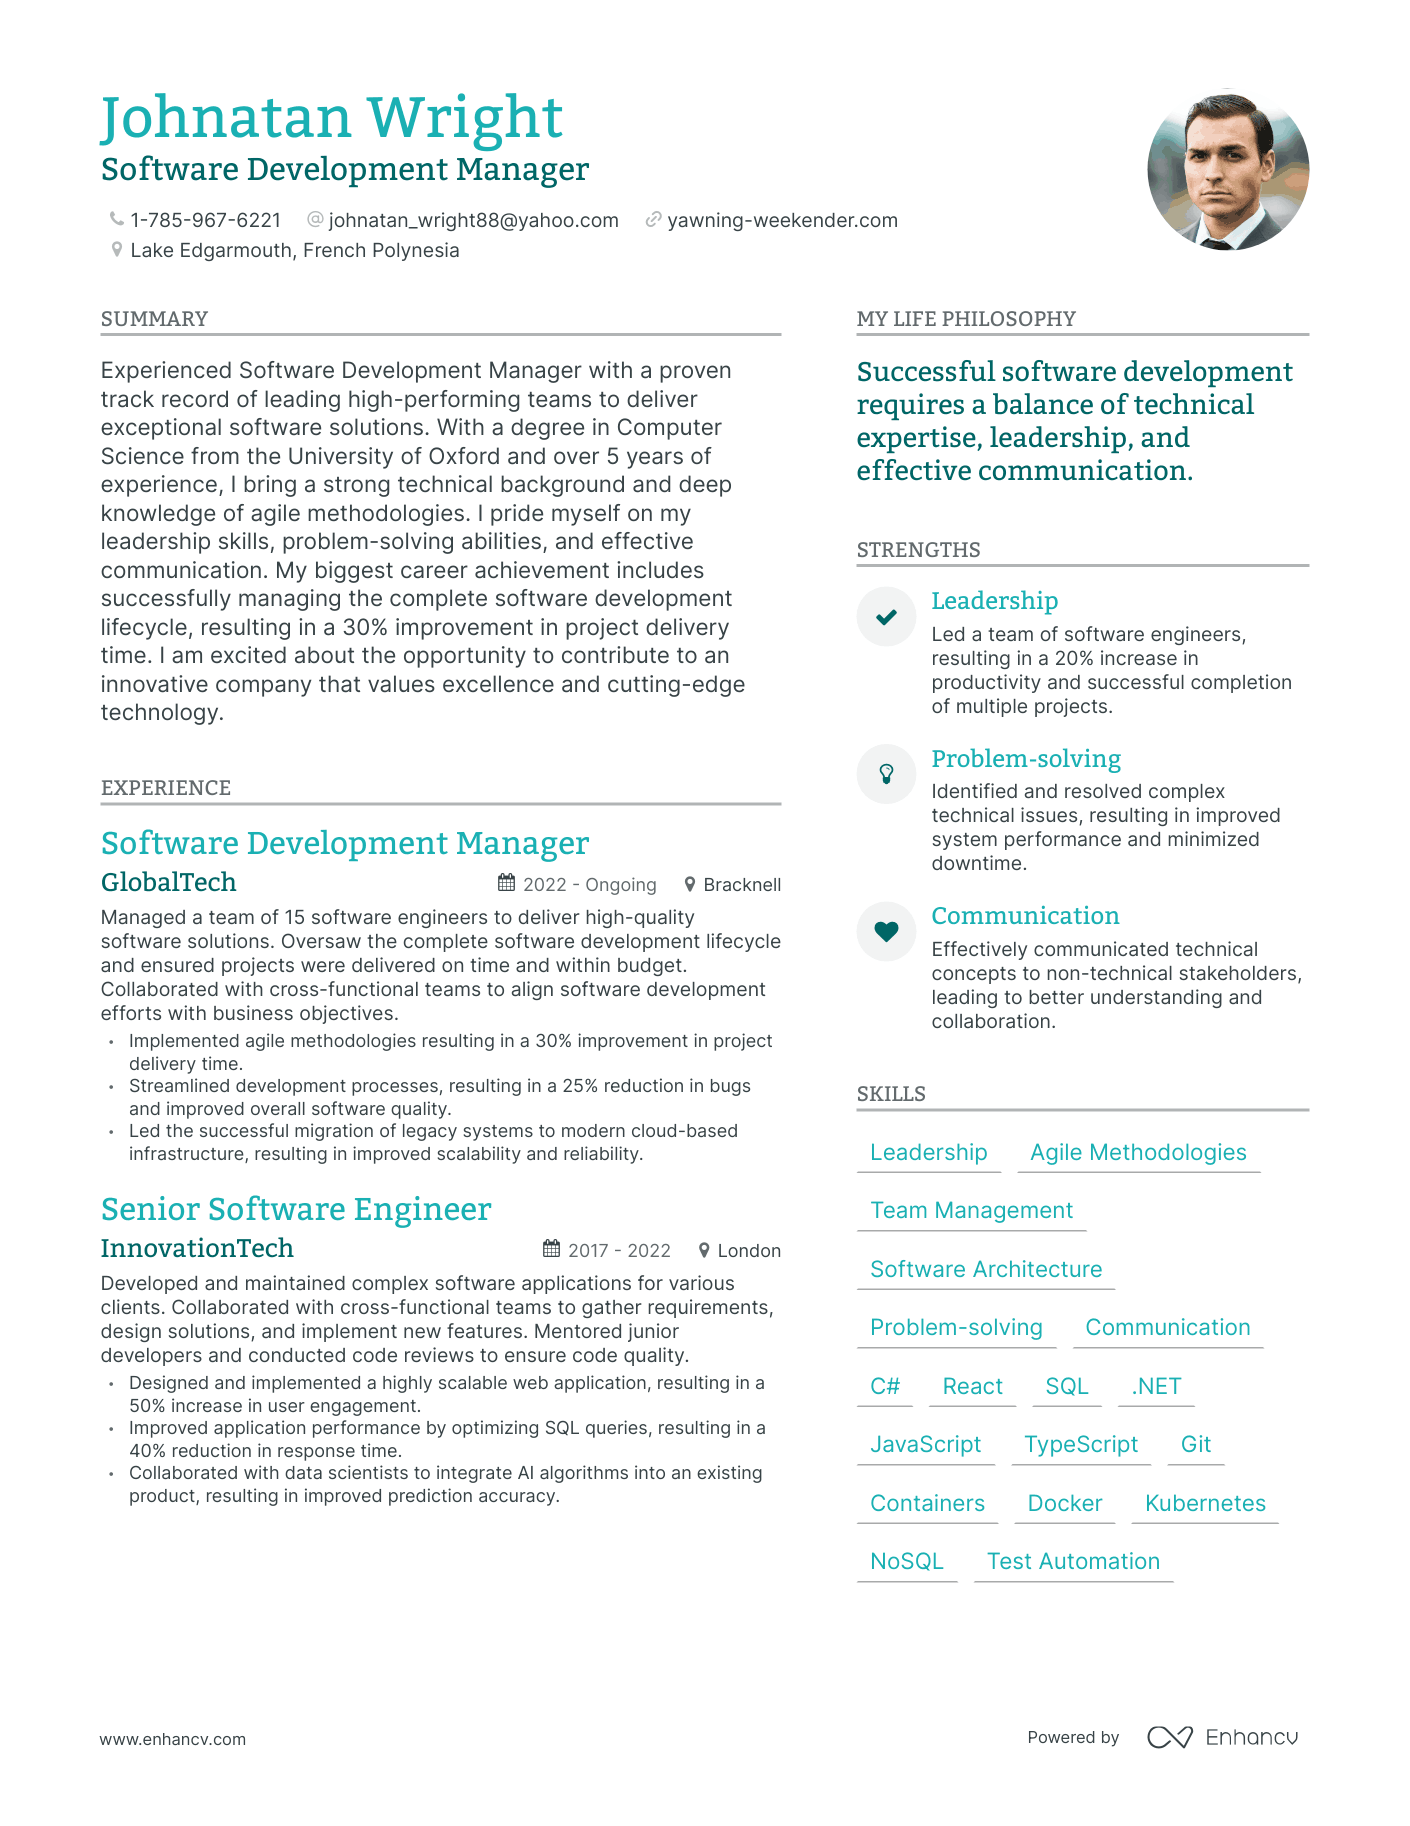 Software Development Manager resume example